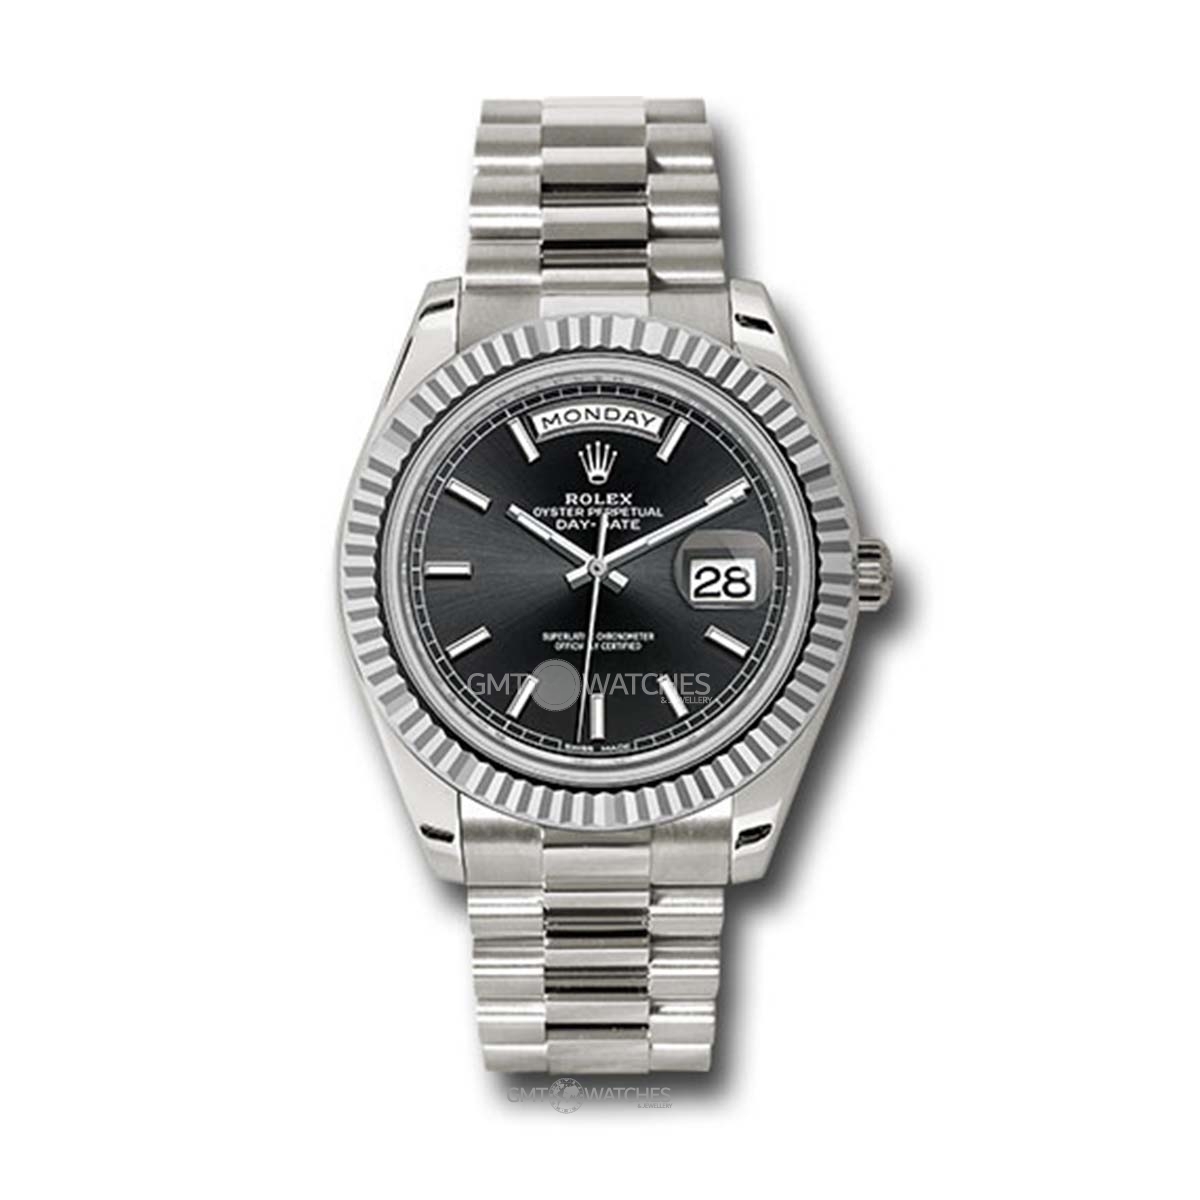 Rolex Oyster Perpetual Day-Date 40mm 18k White Gold 228239 bkip